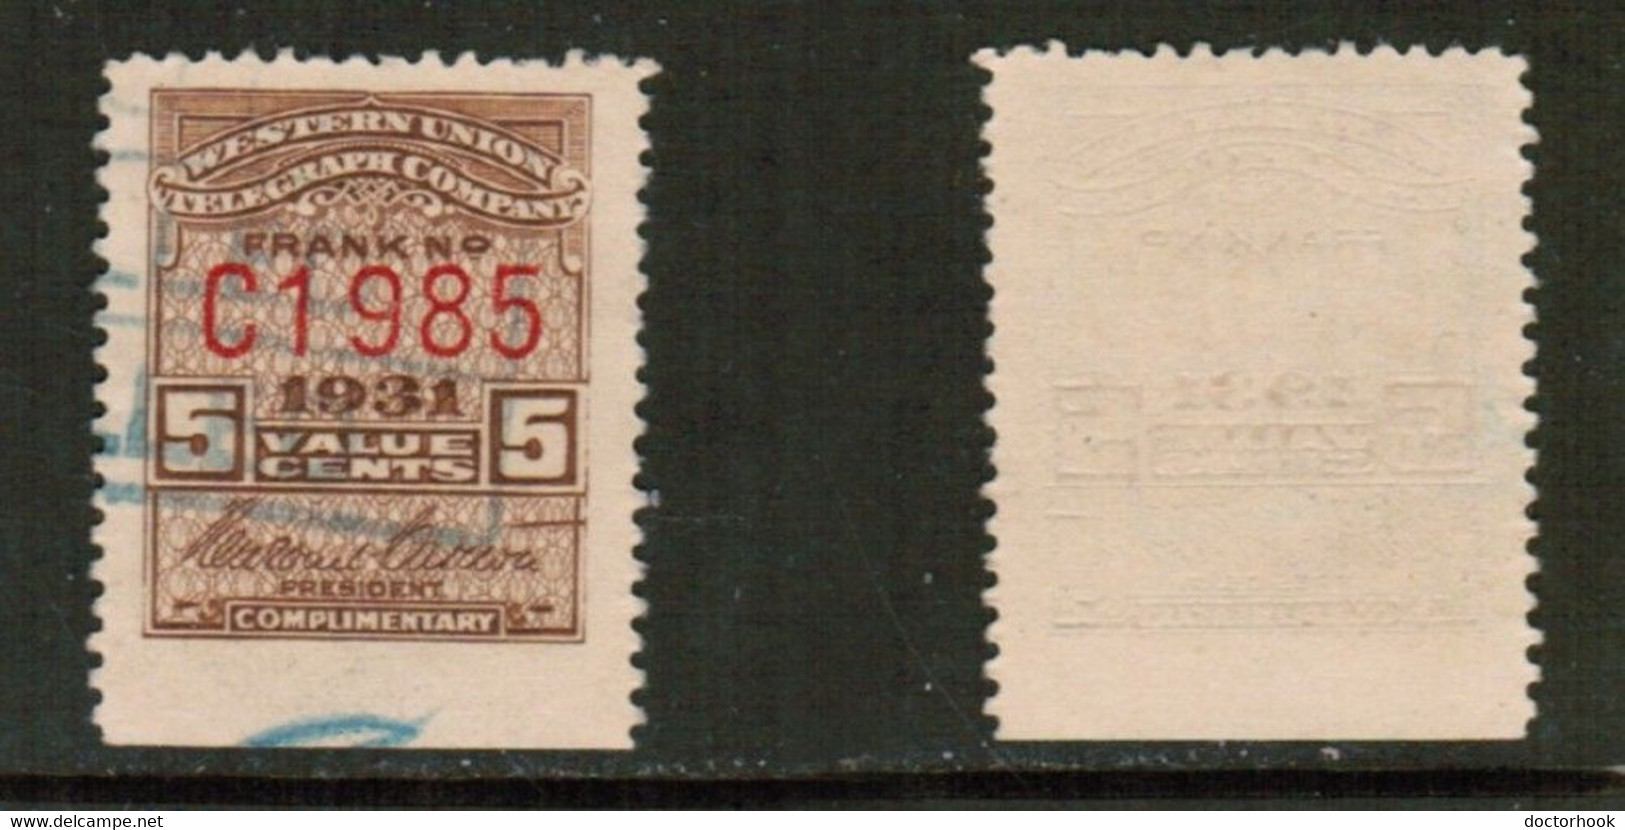 U.S.A.  1931---5 CENT WESTERN UNION TELEGRAPH STAMP USED (CONDITION AS PER SCAN) (Stamp Scan # 839-15) - Telegraph Stamps